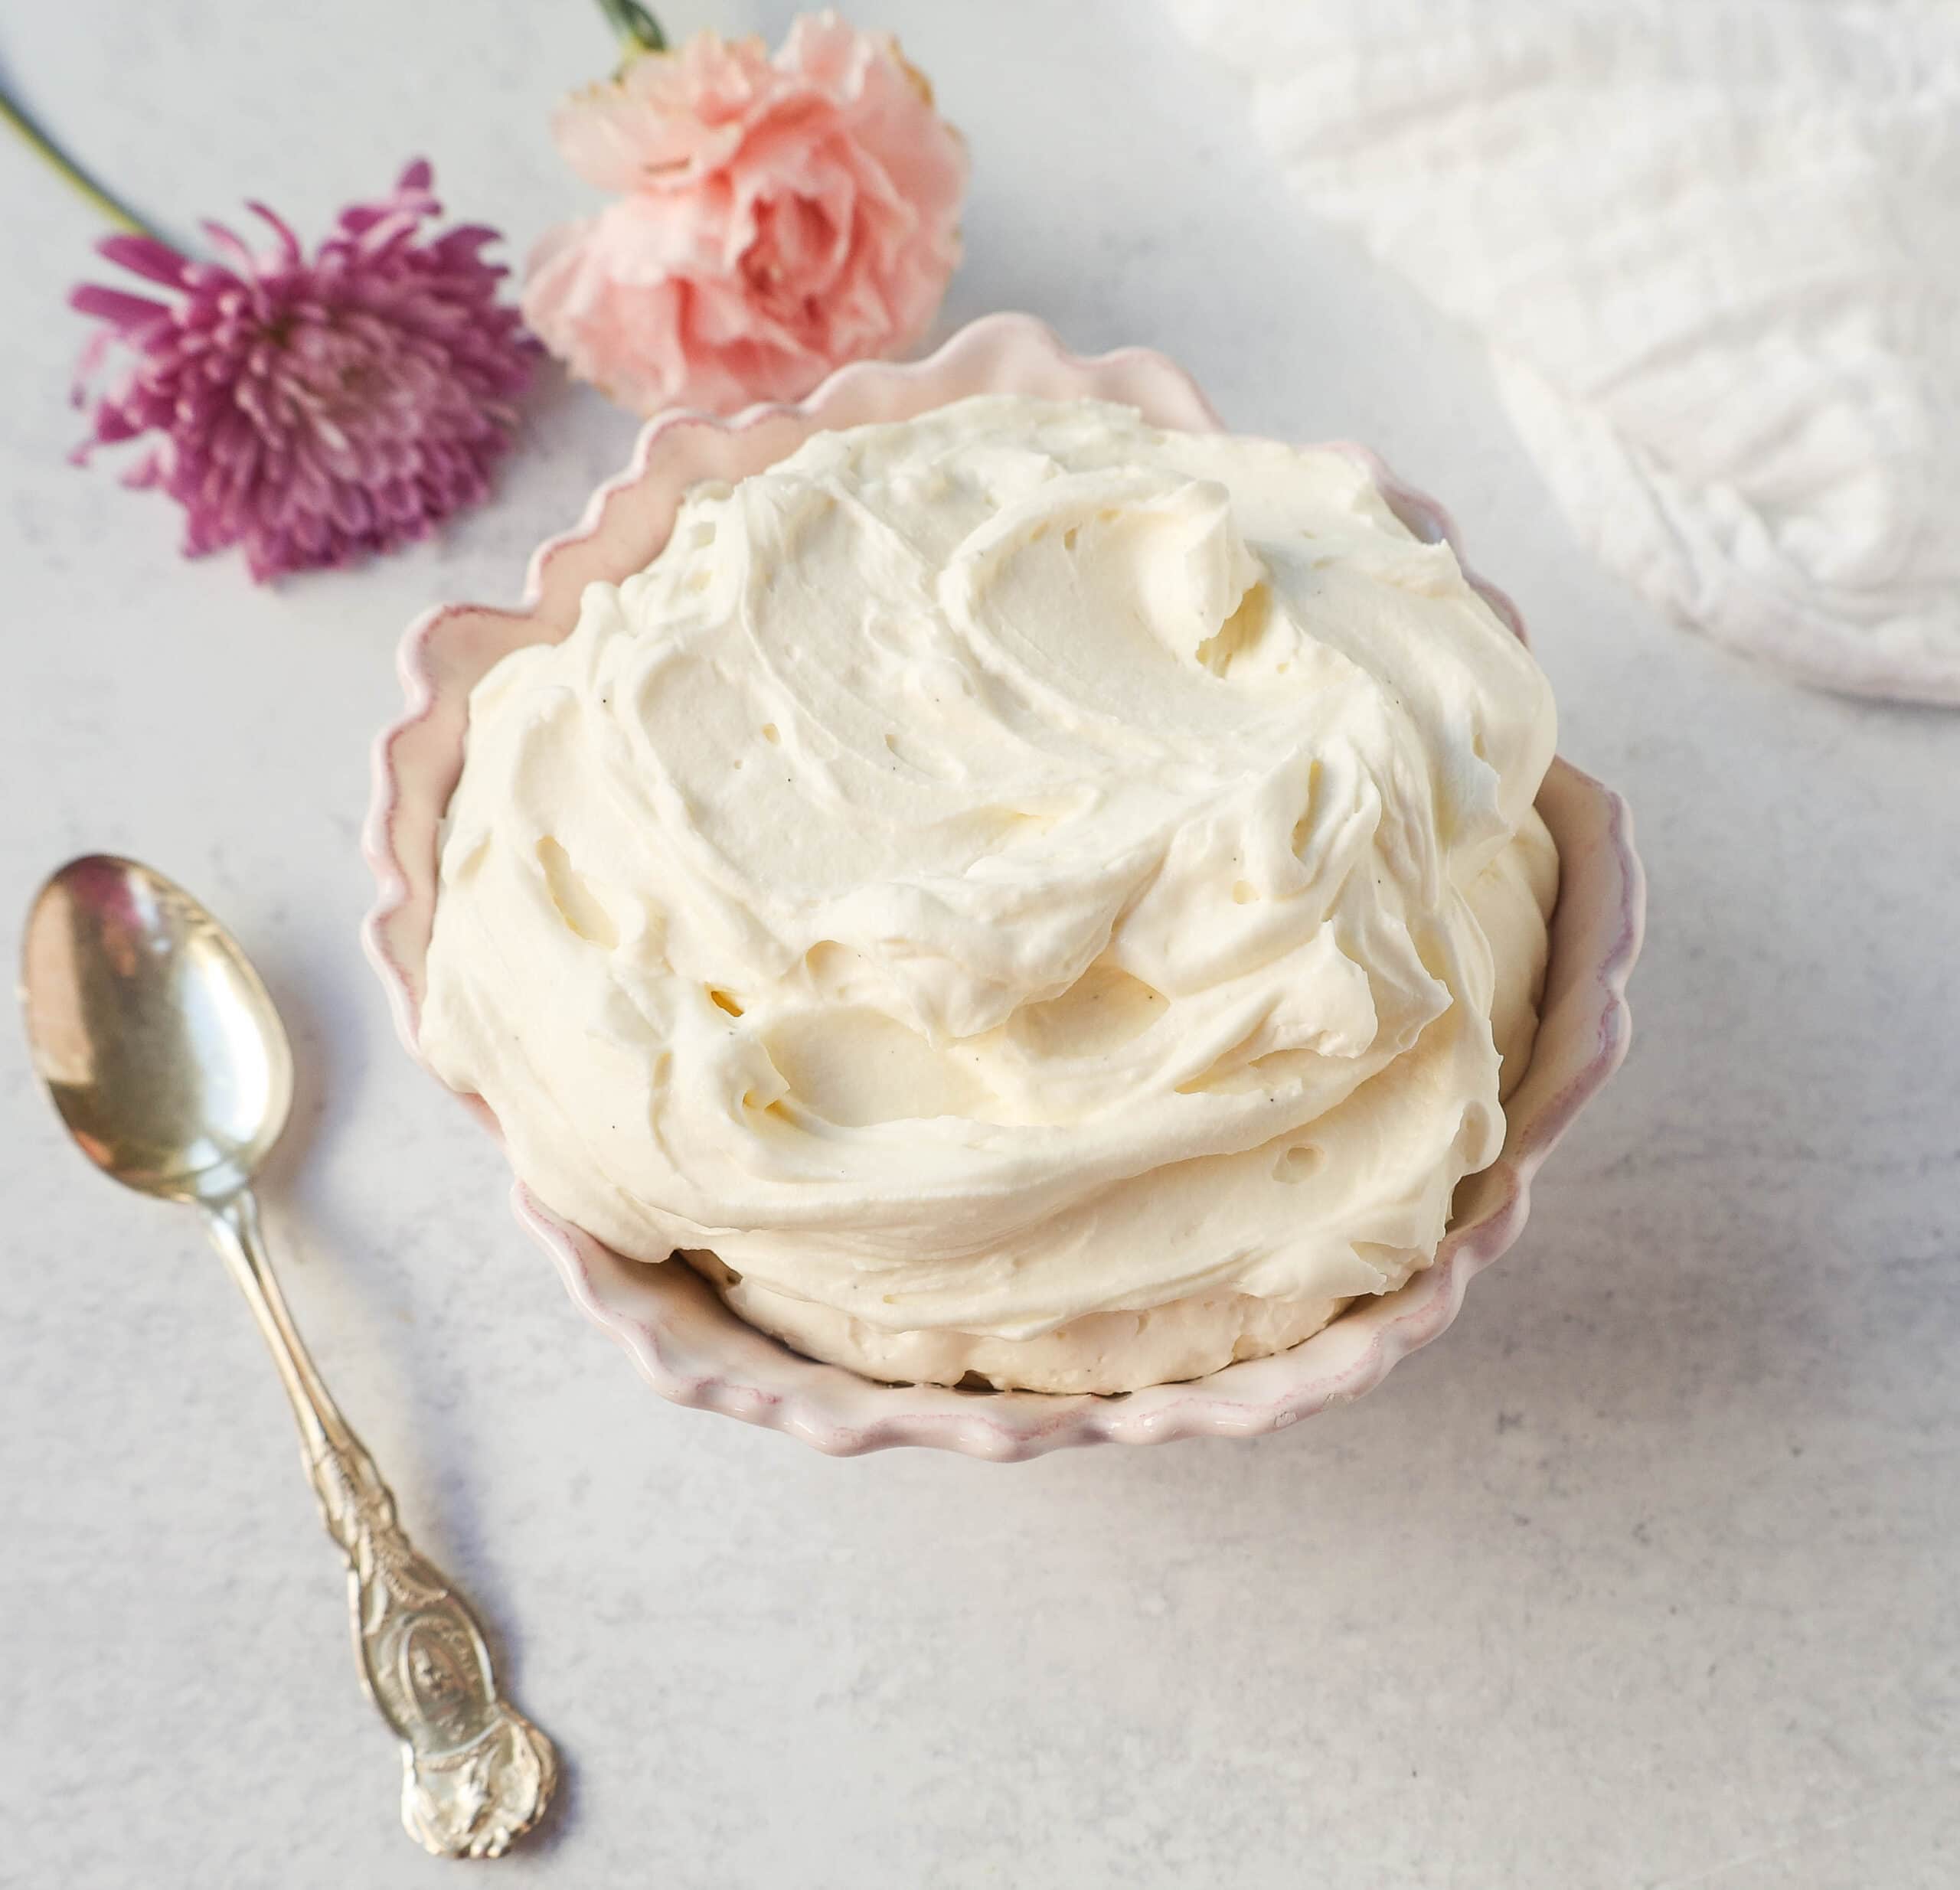 Creamy mascarpone cream is the most delicious and luxurious cake filling, dessert filling, or the perfect spread on any dessert. It is made with heavy cream, mascarpone cheese, powdered sugar, and vanilla or almond extract.